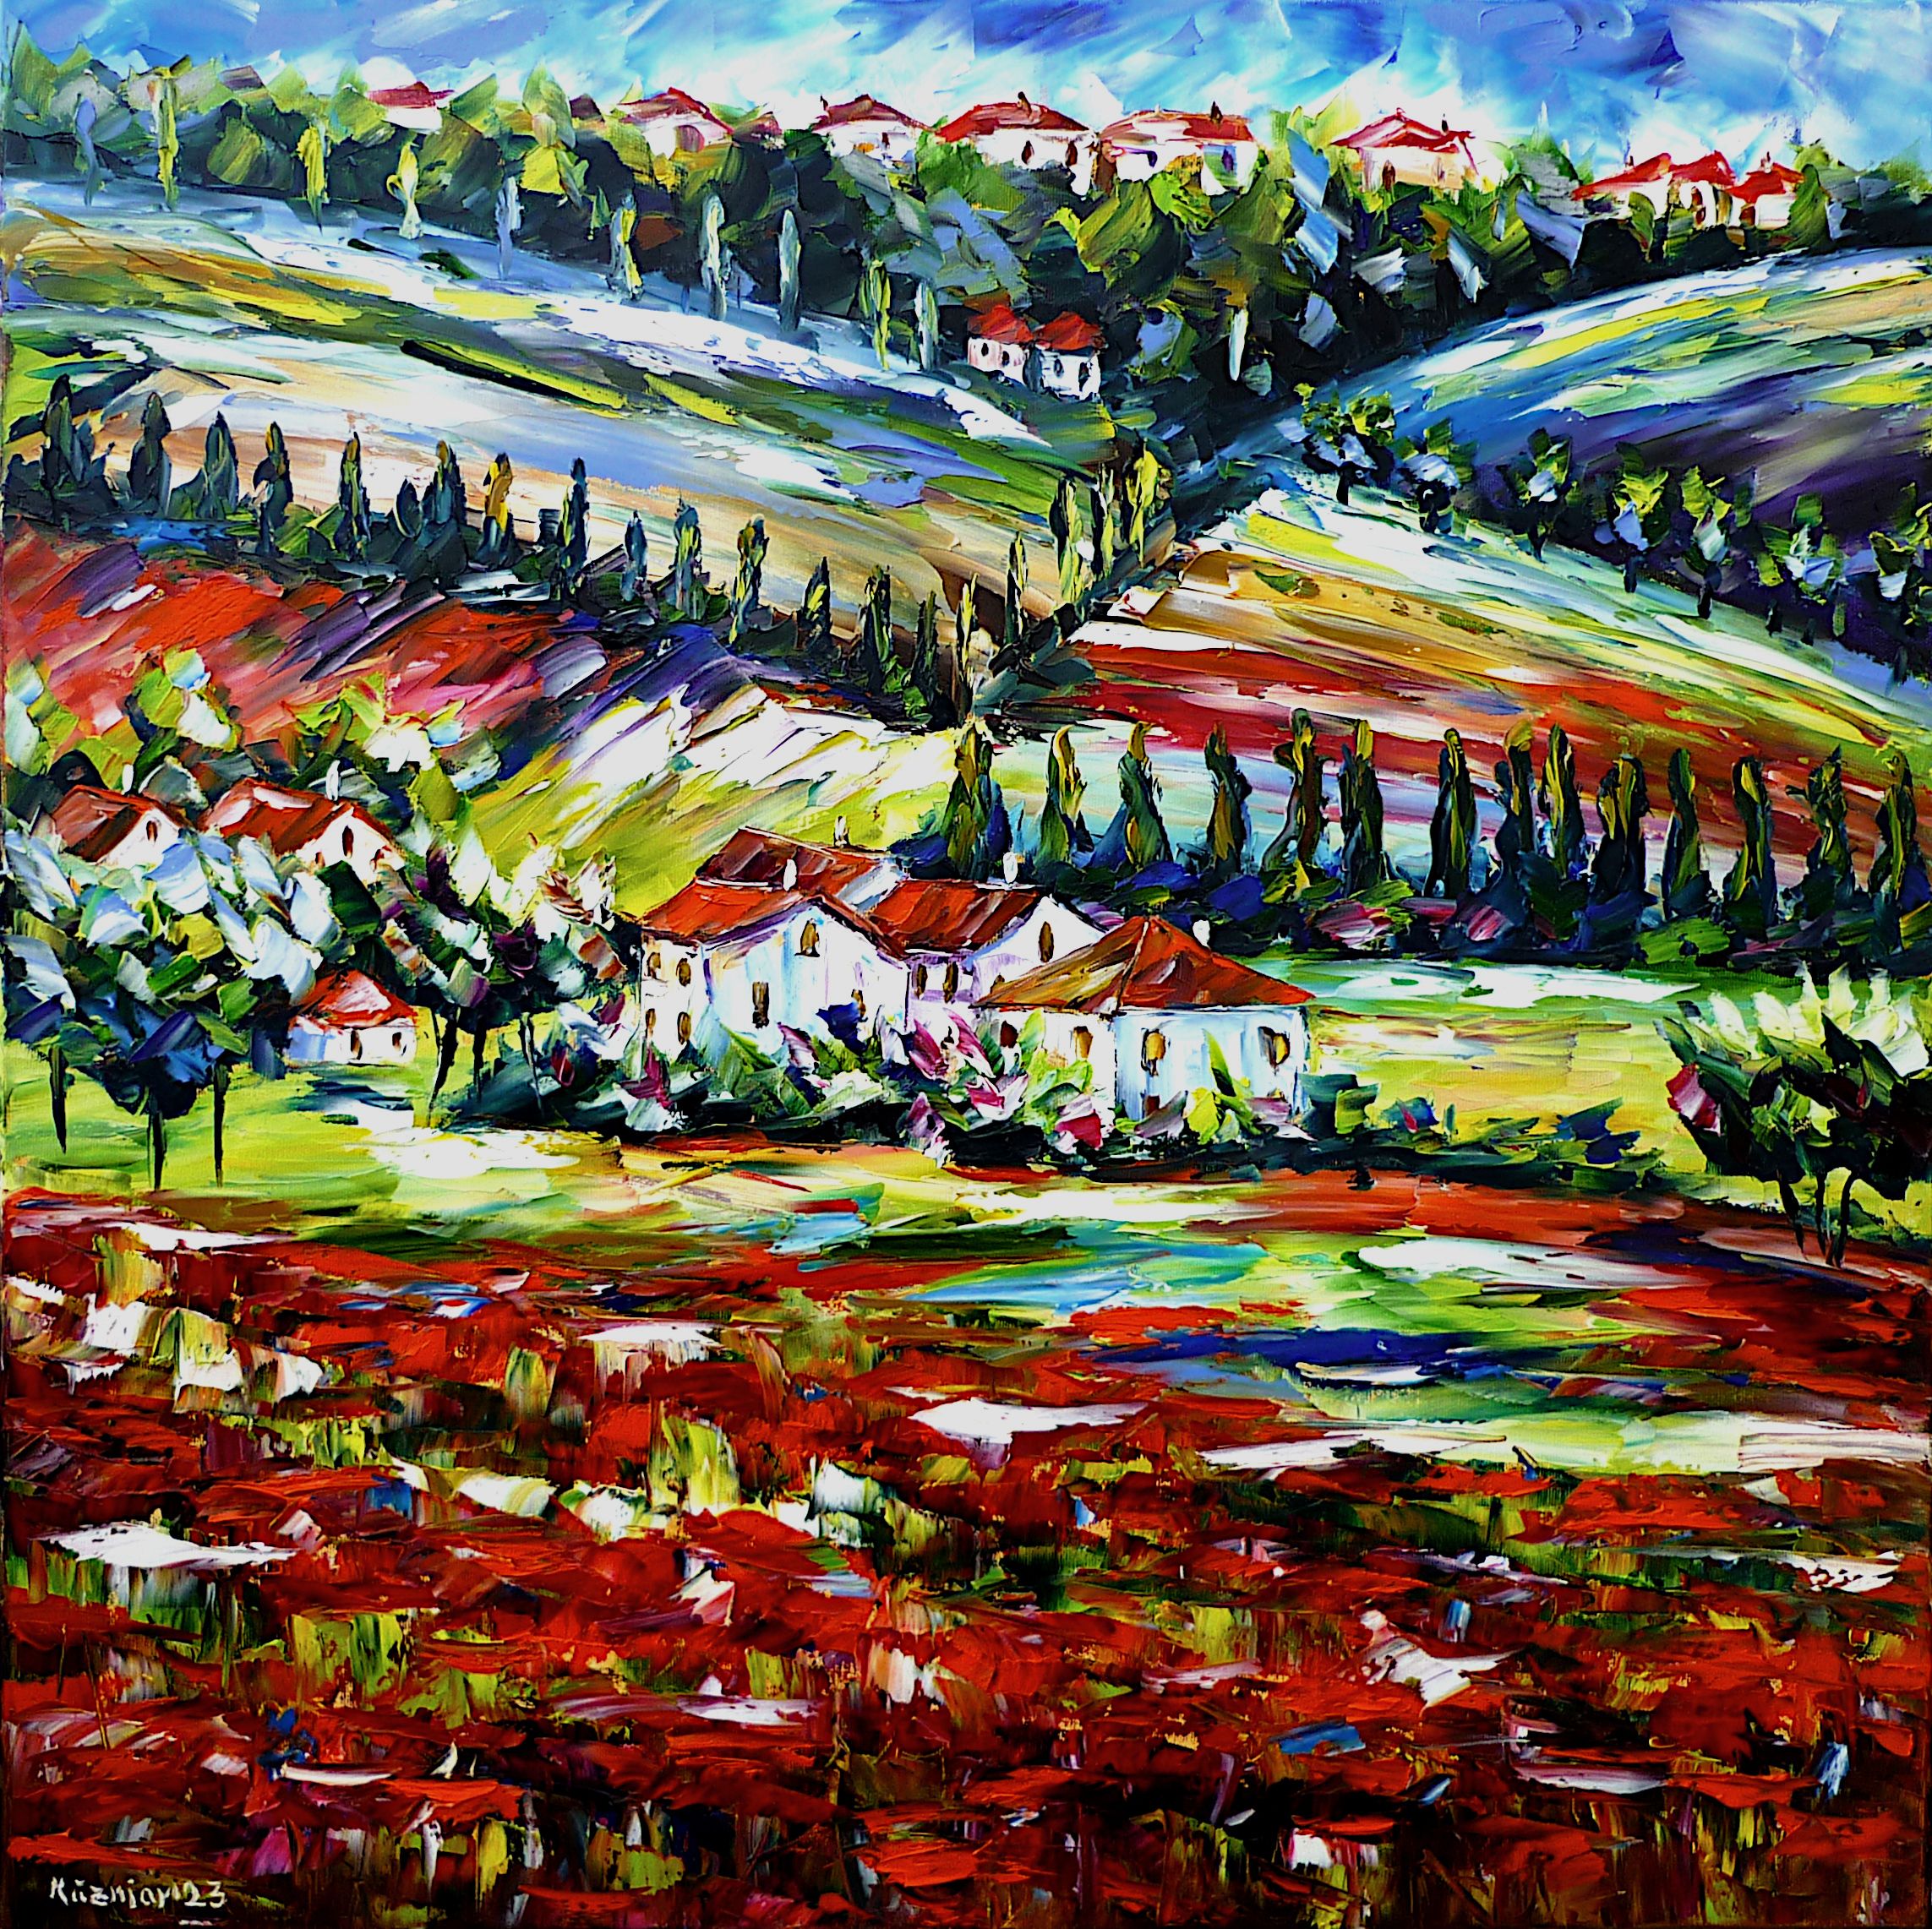 tuscany landscape,tuscany painting,tuscany art,tuscany poppy fields,red poppy fields,cypresses,village in tuscany,mountains of tuscany,chianti,colline del chianti,monti del chianti,beautiful tuscany,tuscany beauty,spring in tuscany,summer in tuscany,landscape painting,tuscany love,tuscany lover,i love tuscany,tuscany abstract,italy,houses of tuscany,tuscany idyll,country idyll,italian landscape,beautiful italy,square painting,square format,square picture,palette knife oil painting,modern art,figurative art,figurative painting,contemporary painting,abstract painting,lively colors,colorful painting,bright colors,impasto painting